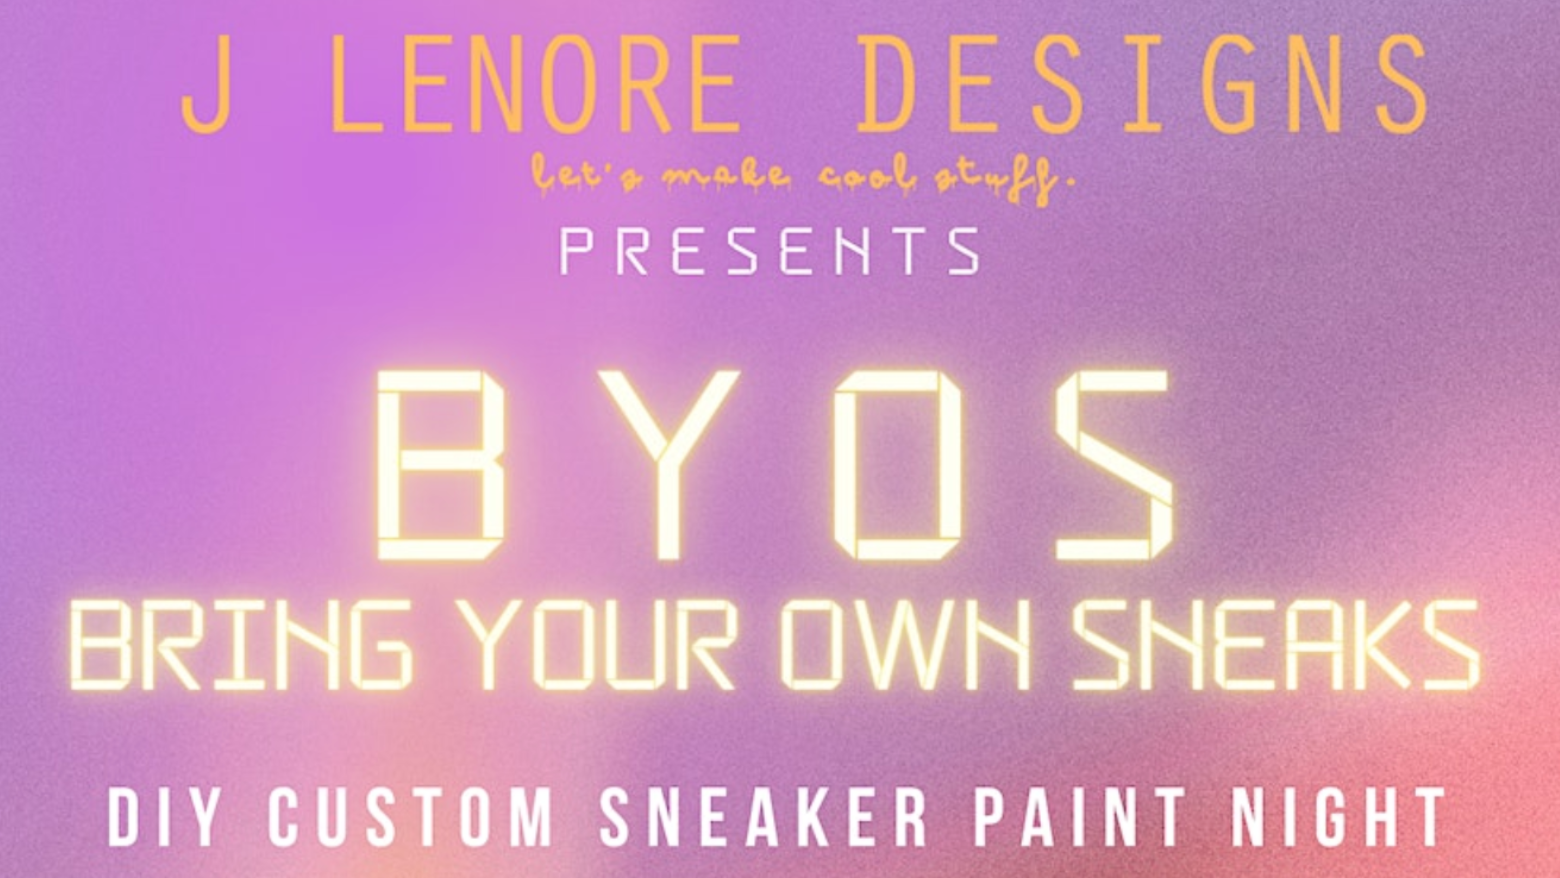 Custom Sneaker Paint Night at Loco - Boston Restaurant News and Events